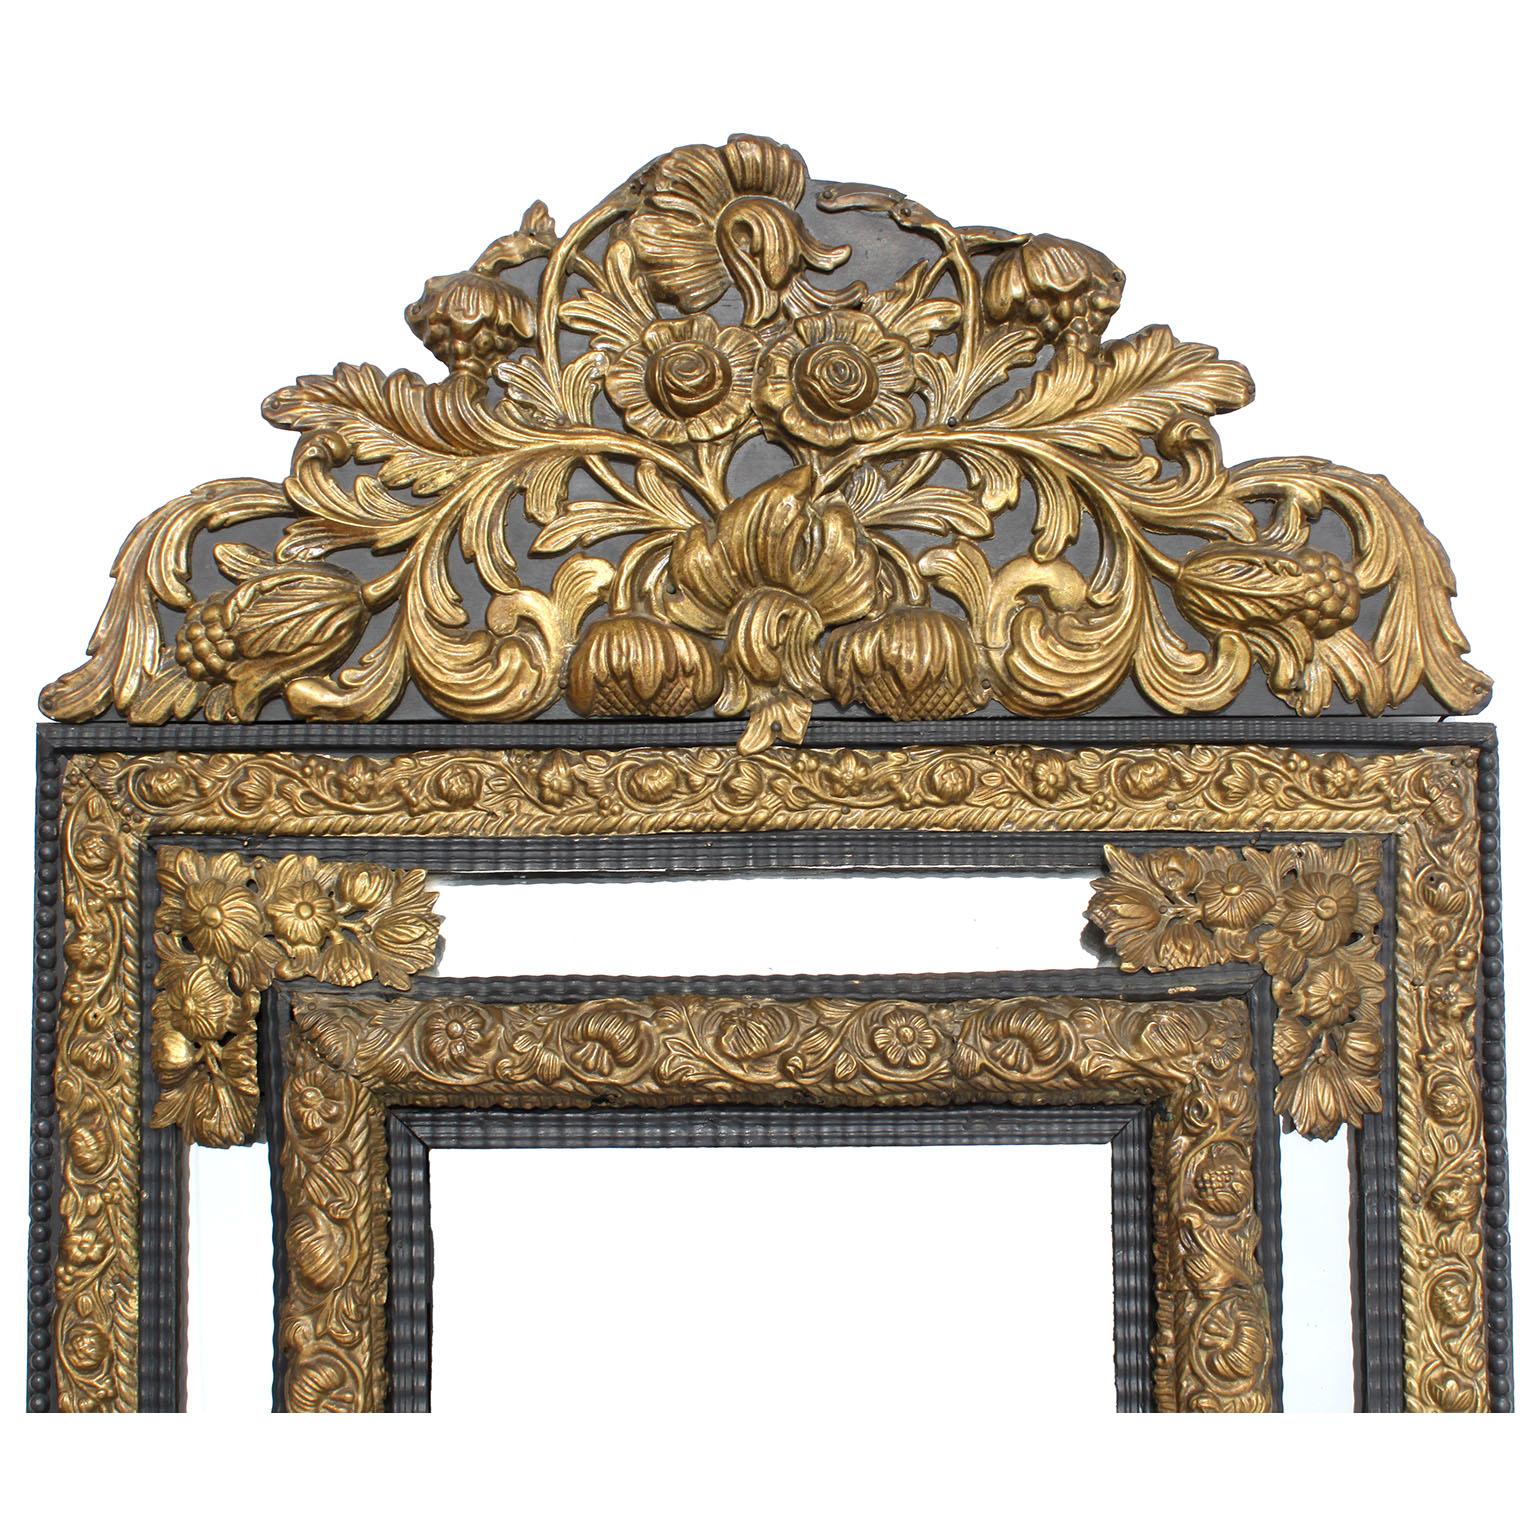 A French 19th Century Baroque Revival Style Gilt-Brass Repoussé Mirror. The ornately hammered and chased brass decorated frame, over an ebonised wooden backing, with a floral and acanthus designed. Circa: 1880.

Repoussé (French: [ʁəpuse]) or